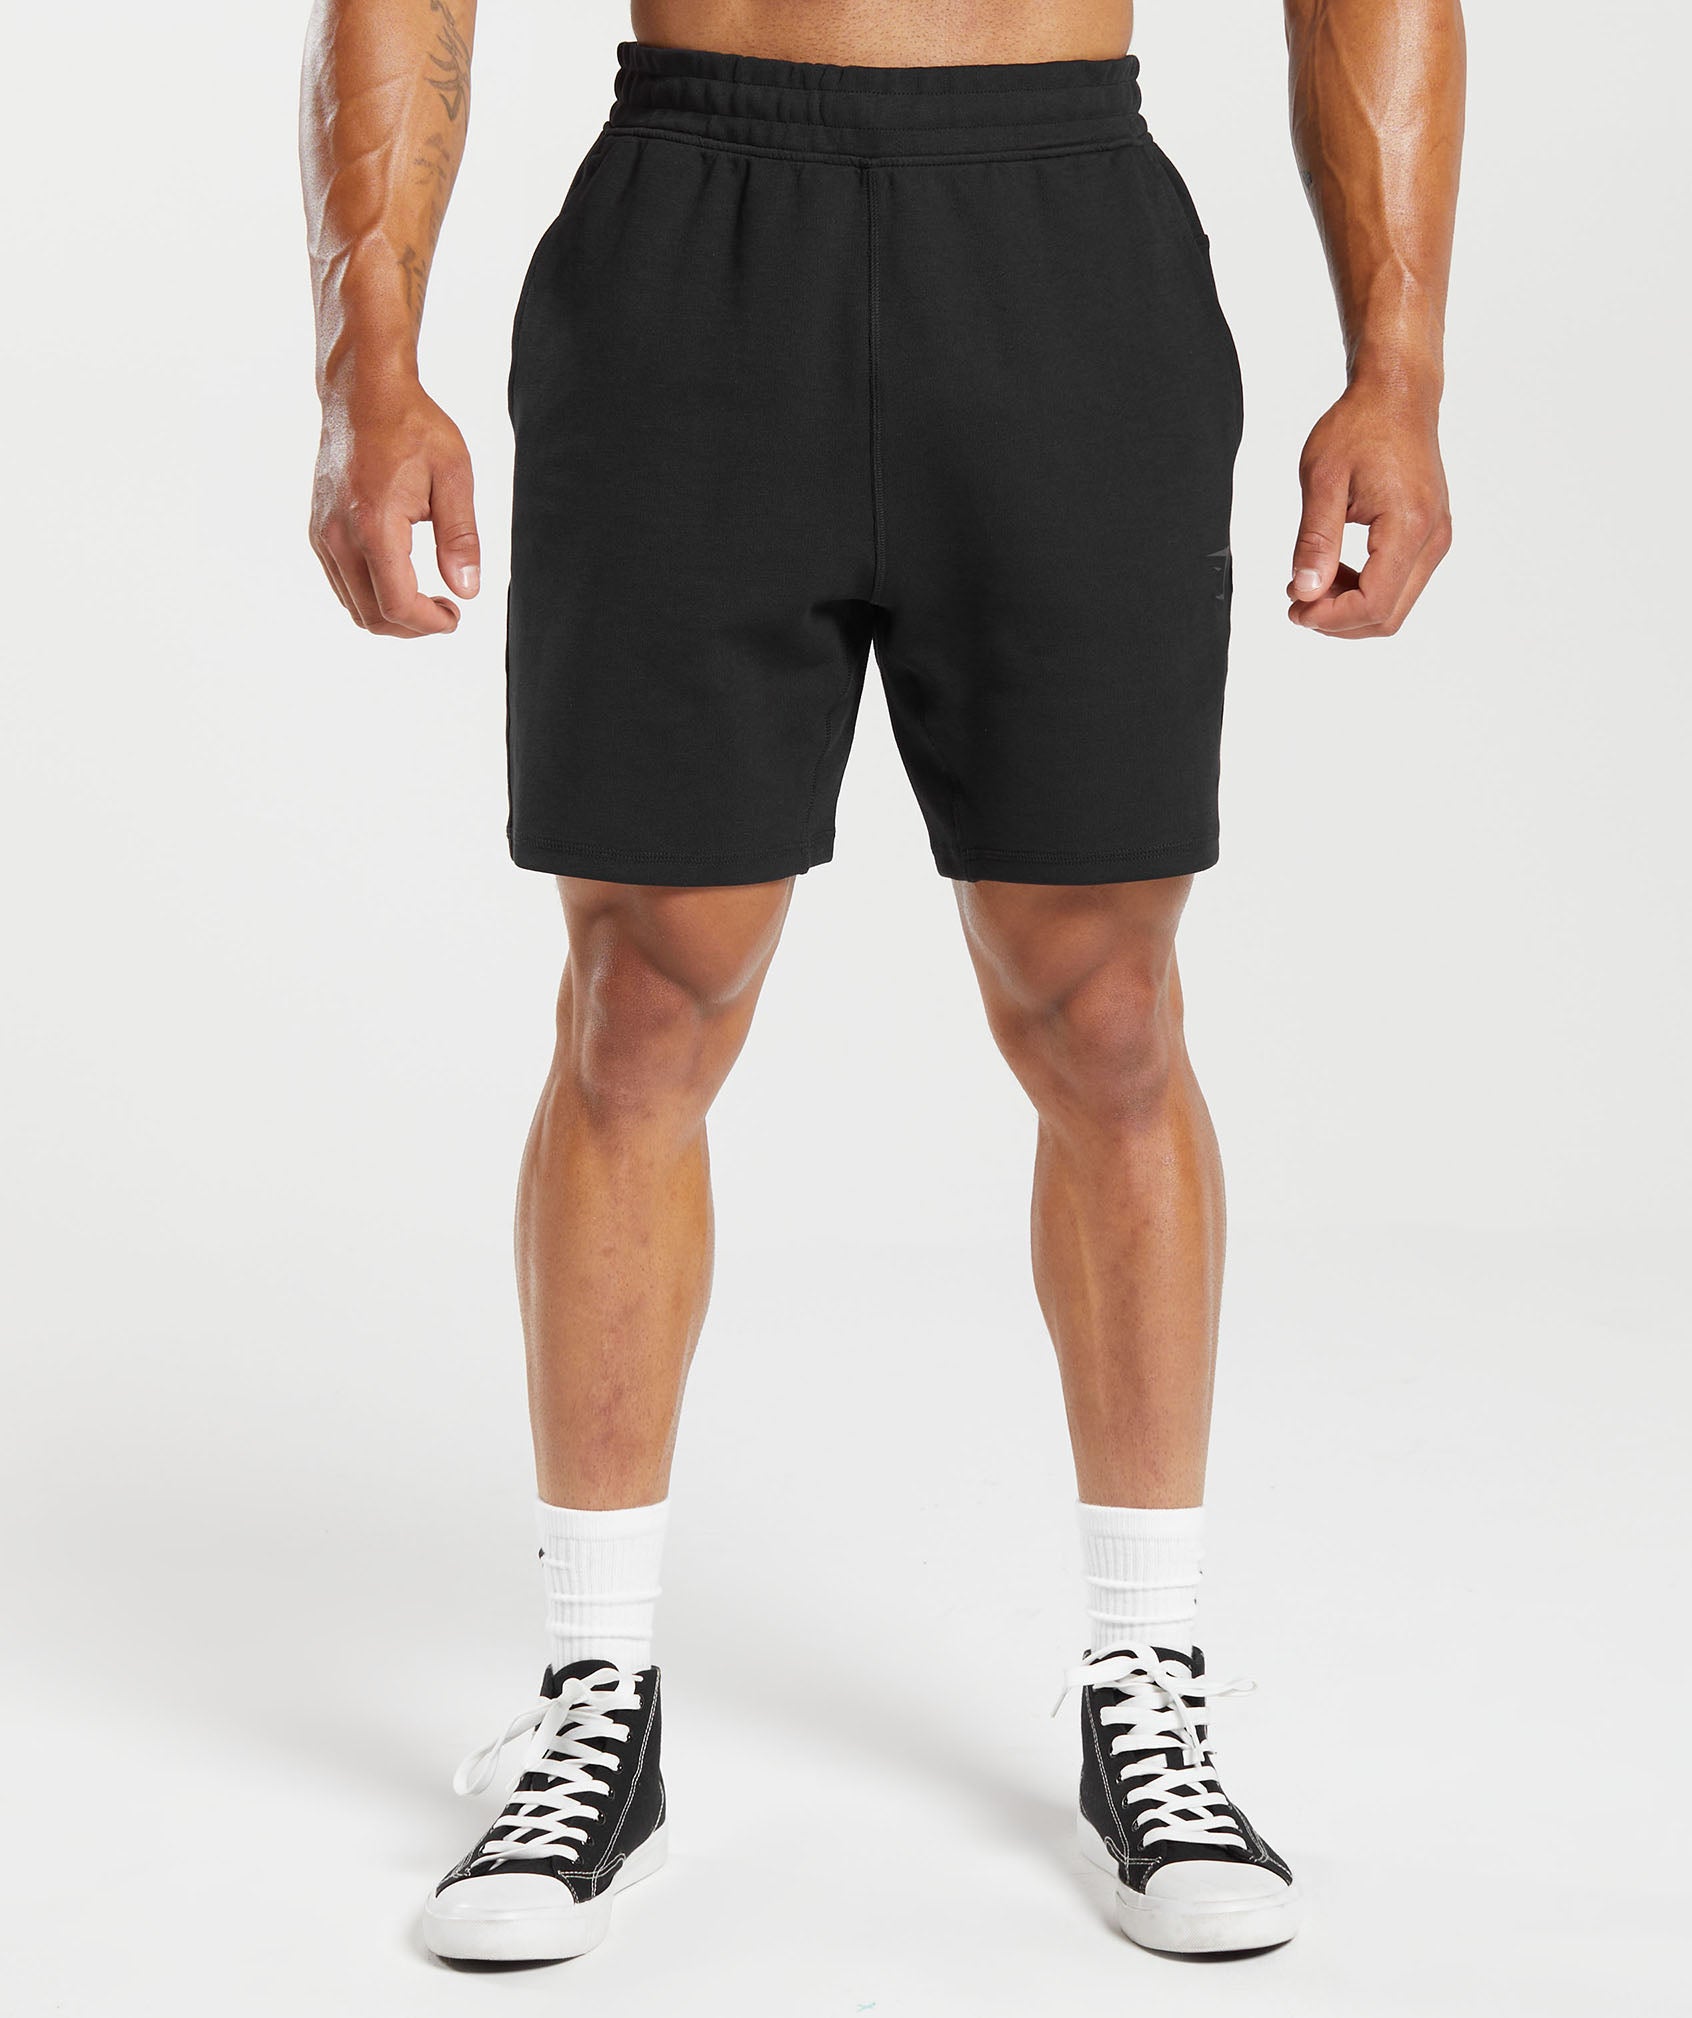 Bold 7" Shorts in Black - view 1